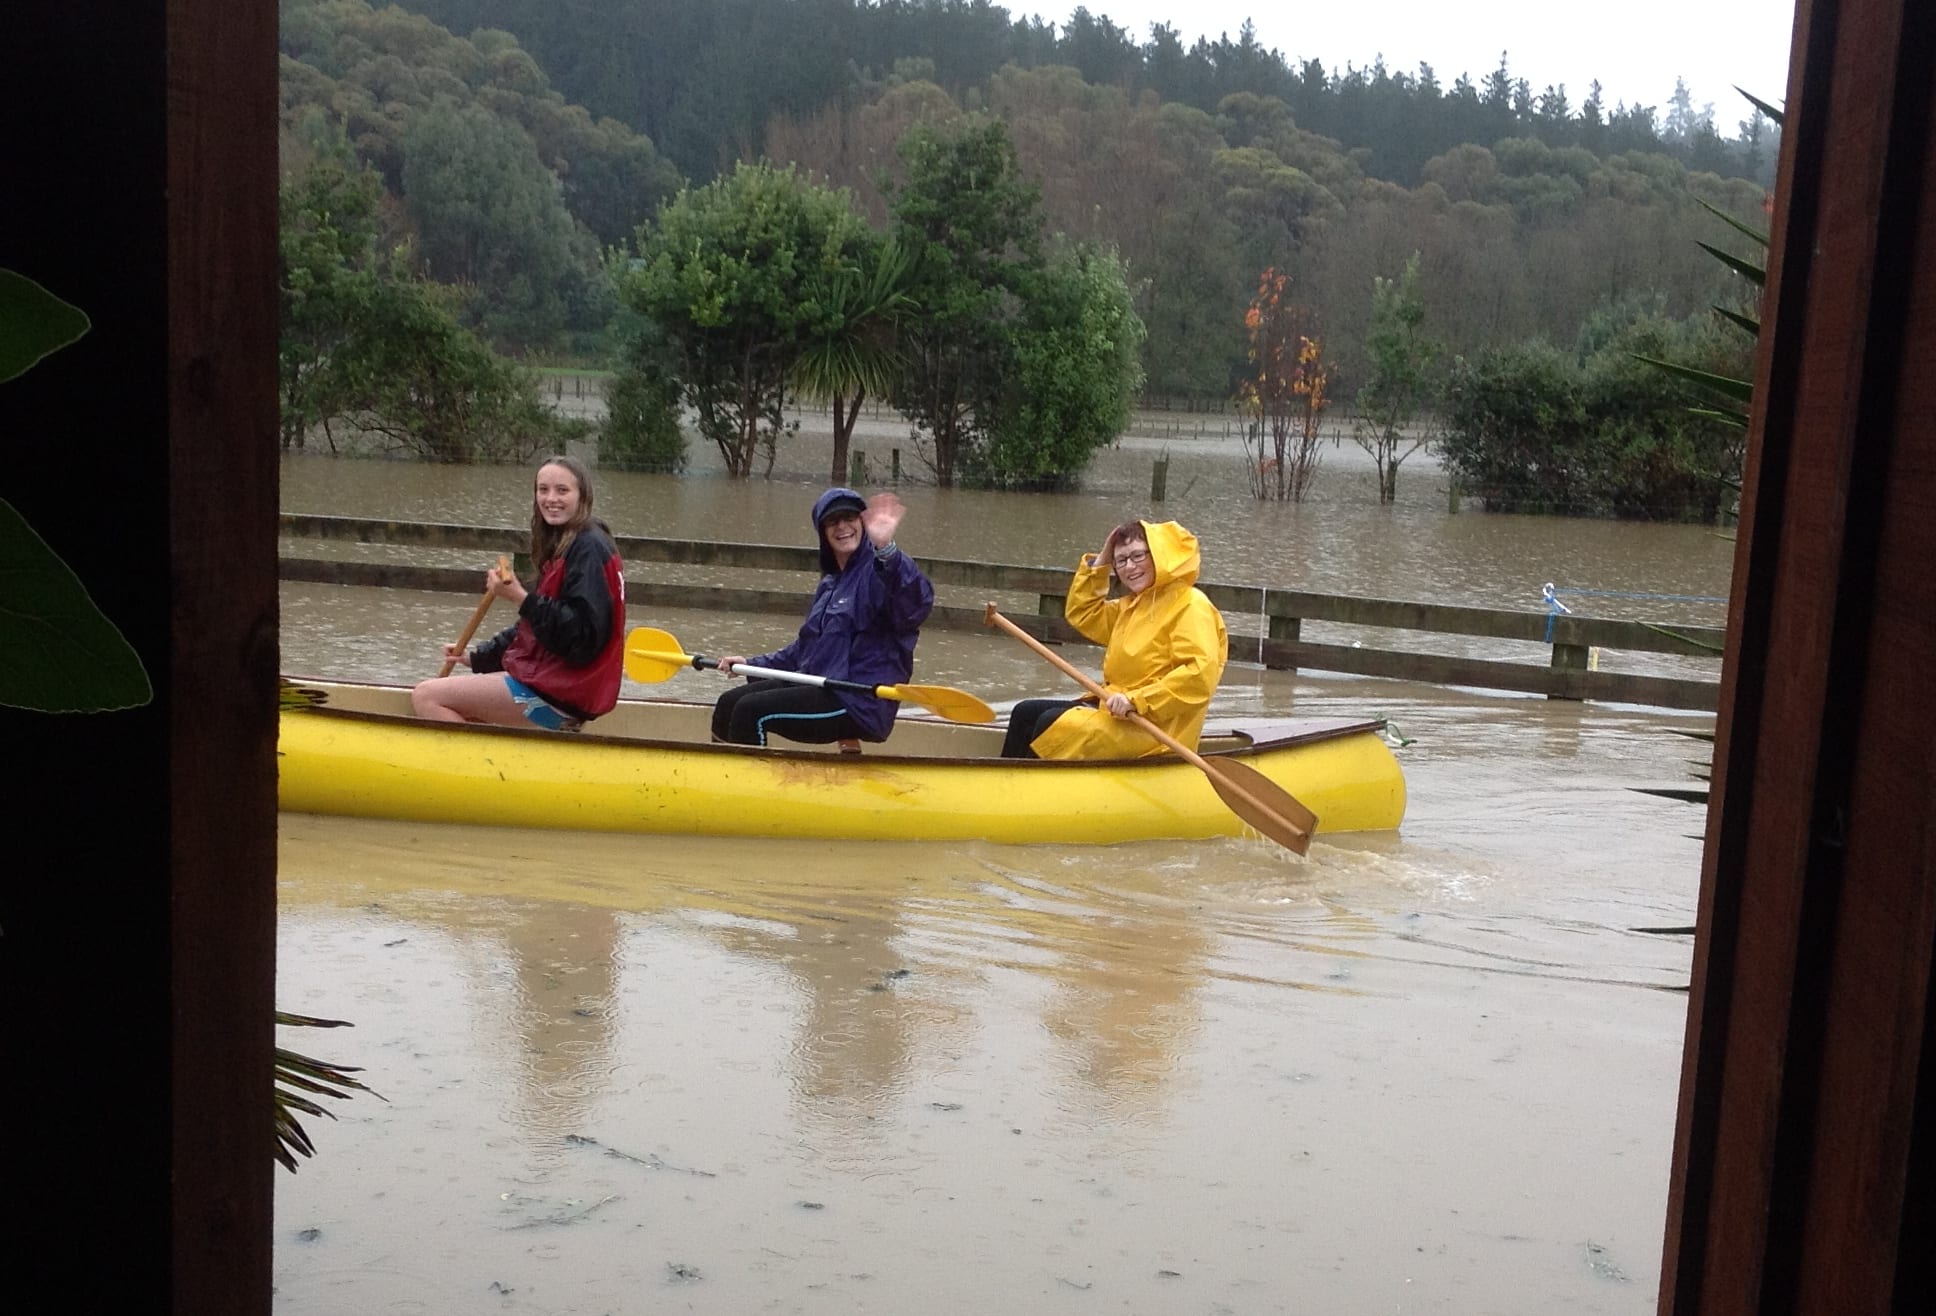 Flooding at Onetere Drive, Wanganui. Left to right - Steph Locket, Maria Williams, Tracey Culver.